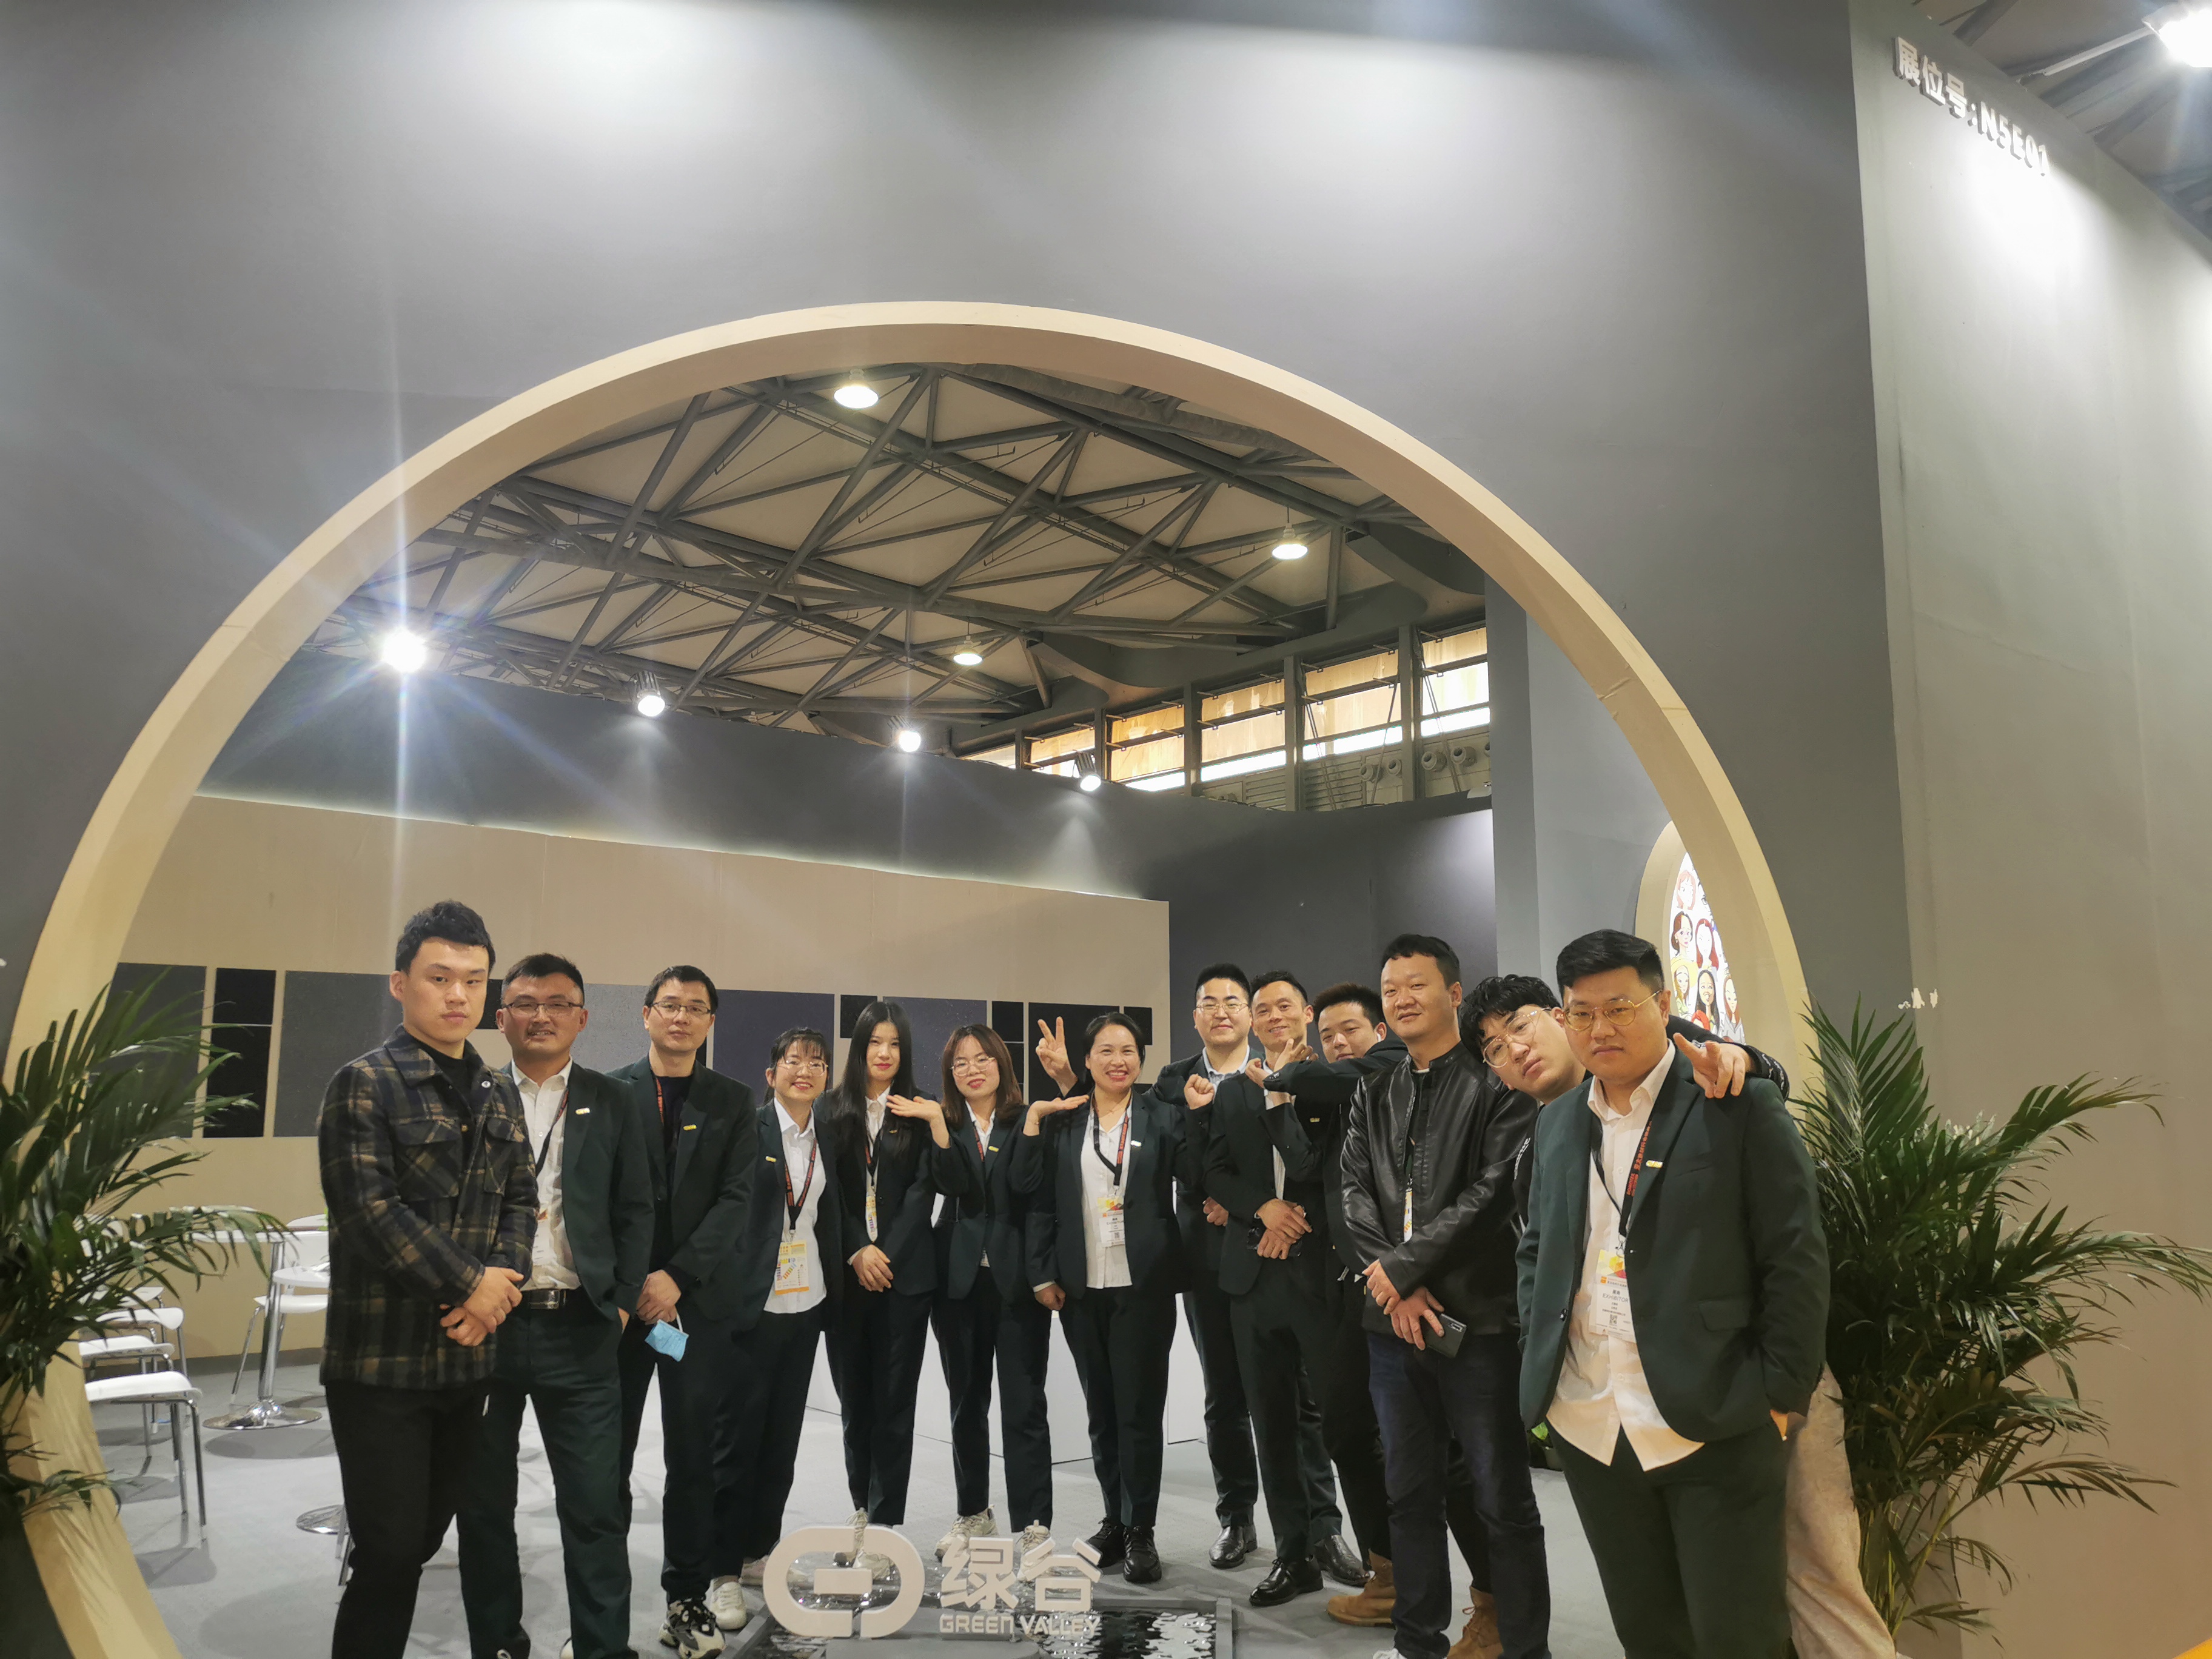 EXHIBITION | Shanghai DOMOTEX Flooring Exhibition, Green Valley made a stunning debut with the latest products